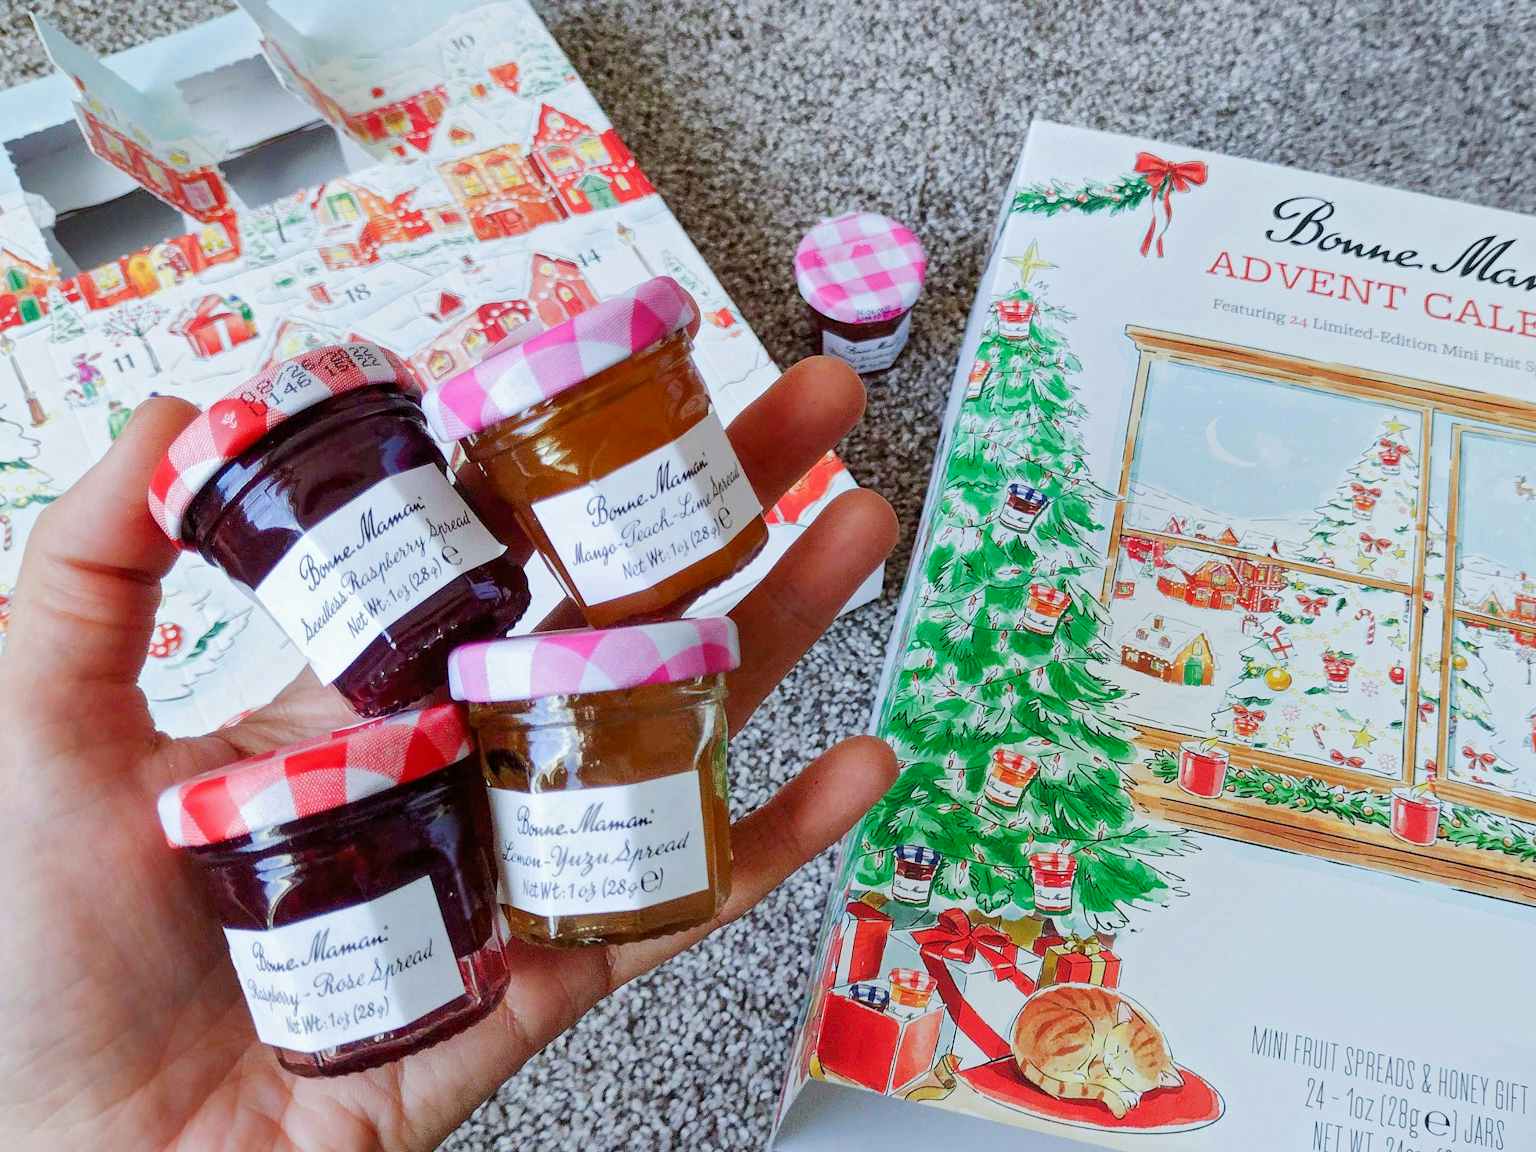 person holding jams and jellies from bonne maman advent calendar